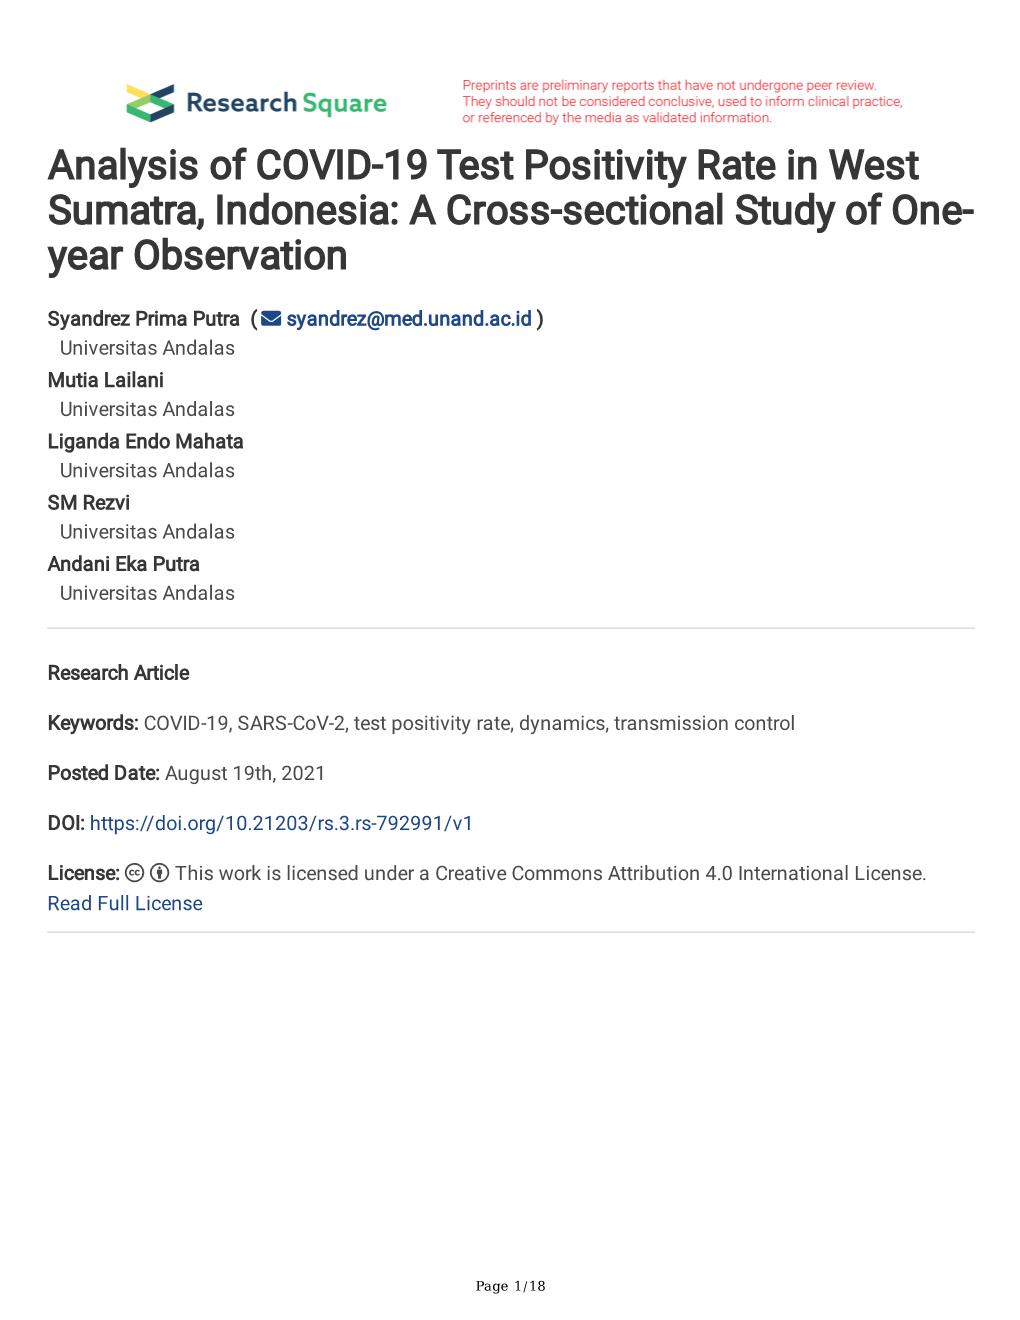 Analysis of COVID-19 Test Positivity Rate in West Sumatra, Indonesia: a Cross-Sectional Study of One- Year Observation